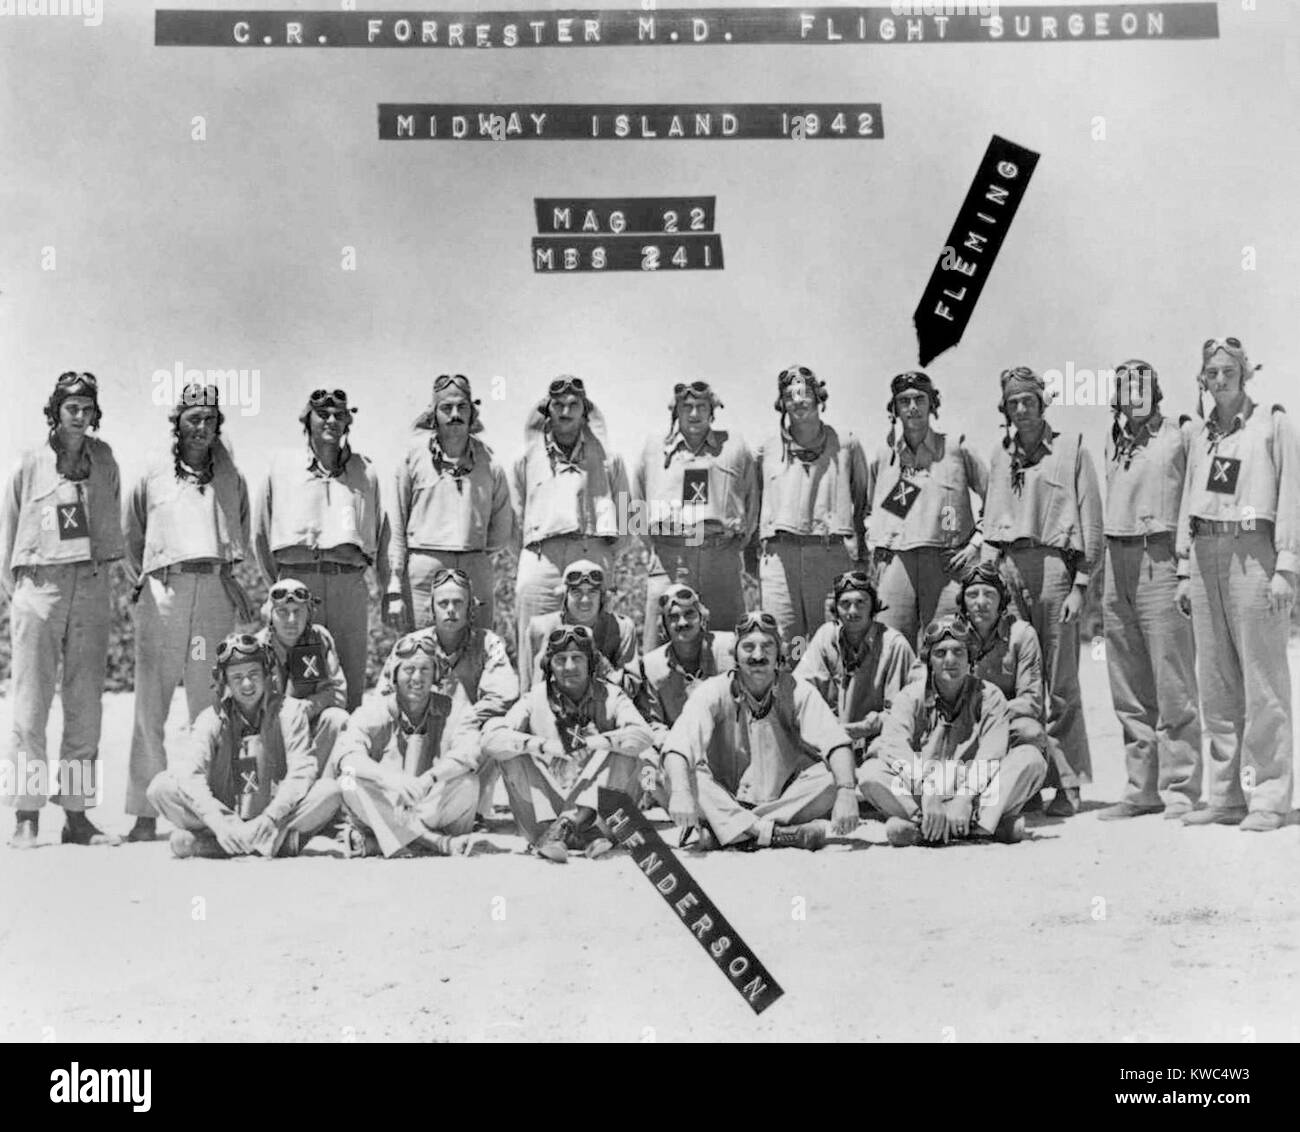 'X' over image of each man who was killed in action in Battle of Midway, June 3-7, 1942. Pilots of Marine Scout Bombing Squadron VMSB 241 on Midway Atoll in 1942. Lofton R. Henderson, Commander of Marine Scout Bombing Squadron 241 was the first Marine Aviator to die during that battle. World War 2. (BSLOC 2015 13 118) Stock Photo